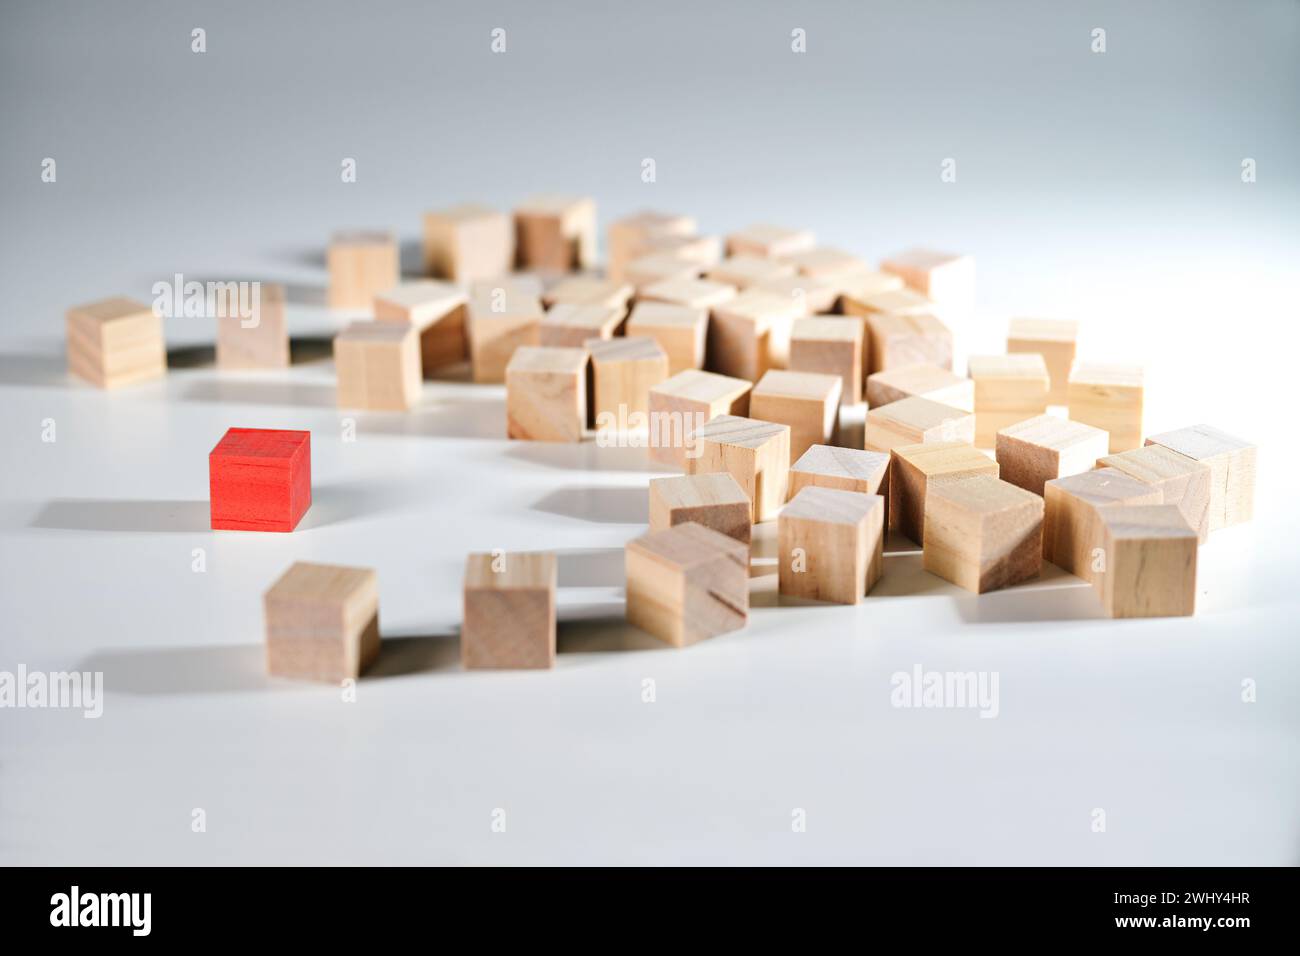 Standing out from the crowd, single red cube and a group of light wooden cubes, concept for being different, social integration Stock Photo